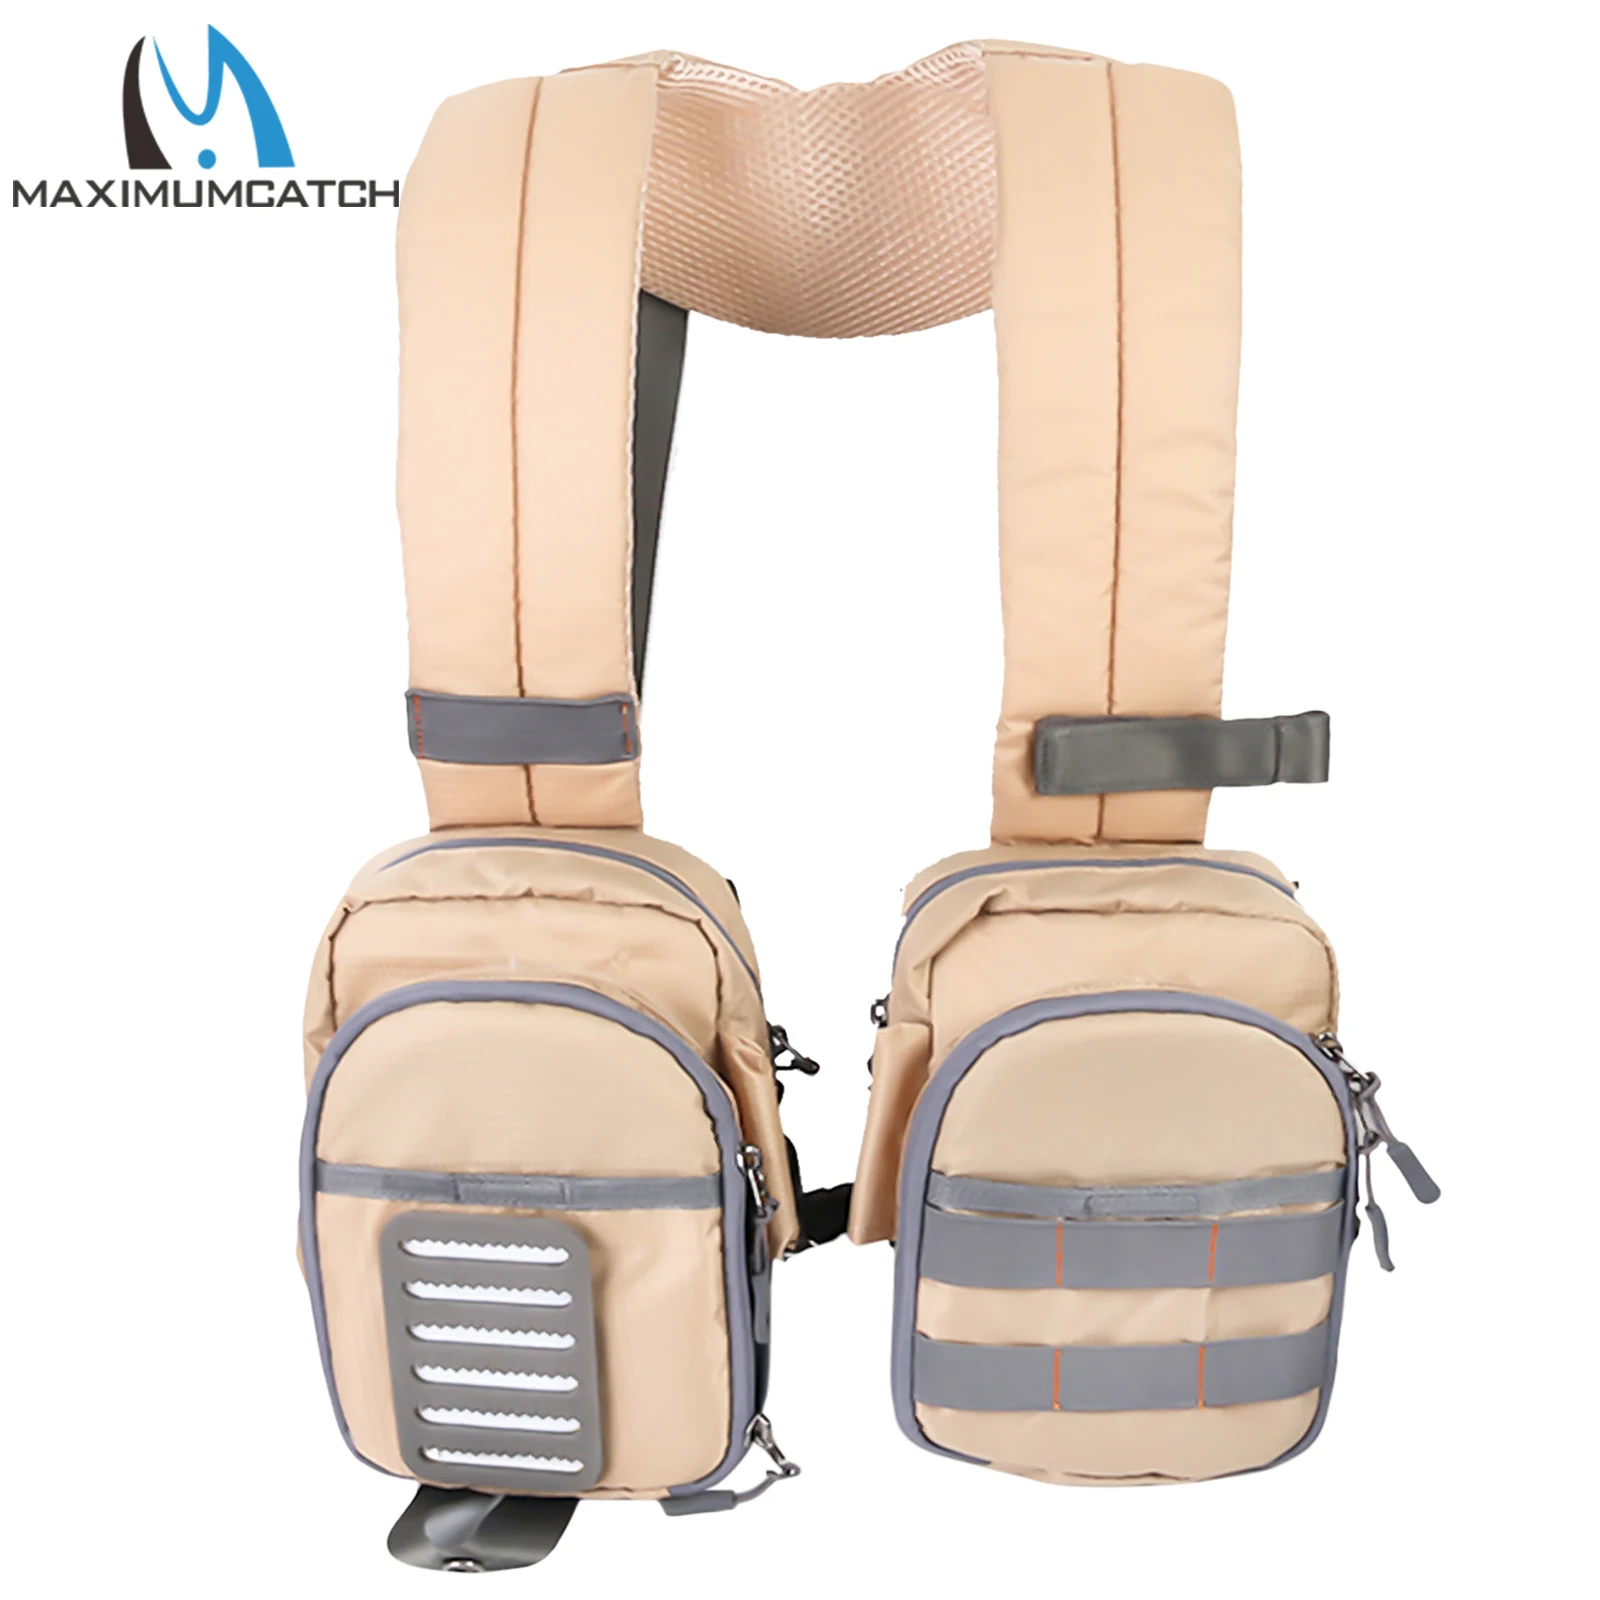 

Maximumcatch Compact Fly Fishing Chest Pack Light Weight Adjustable Fishing Vest for Men Women Outdoor